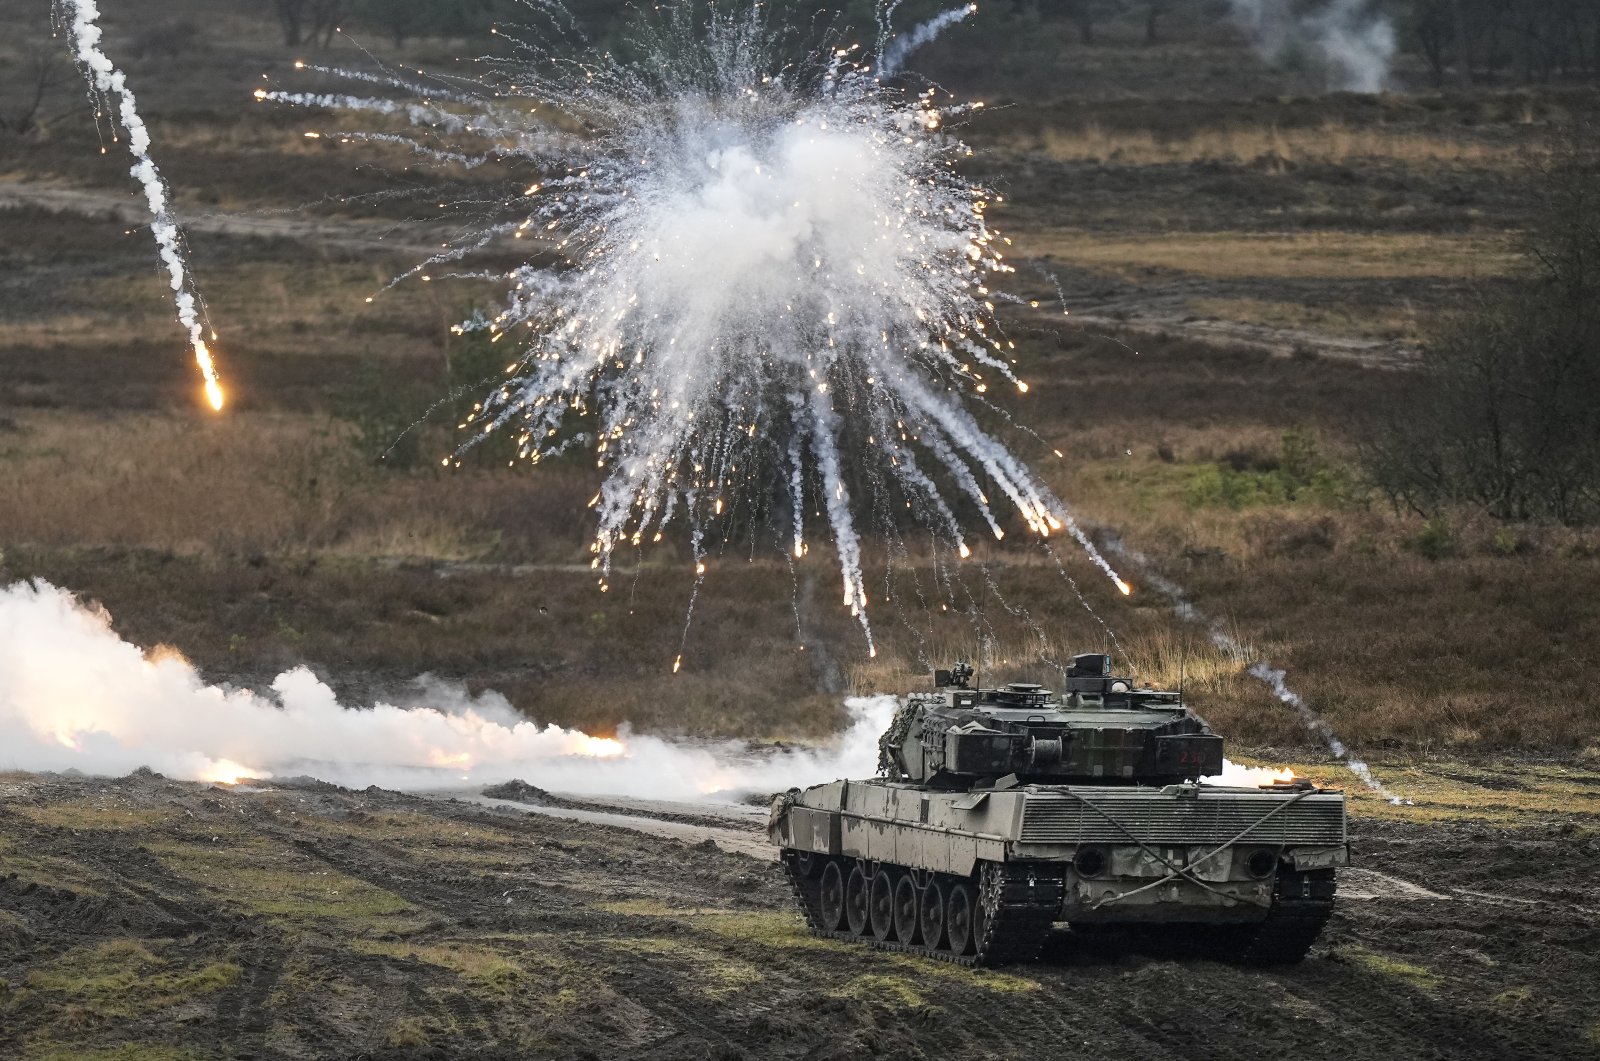  A Leopard 2 tank is seen in action at the Bundeswehr tank battalion 203 at the Field Marshal Rommel Barracks in Augustdorf, Germany, Wednesday, Feb. 1, 2023. (AP File Photo)